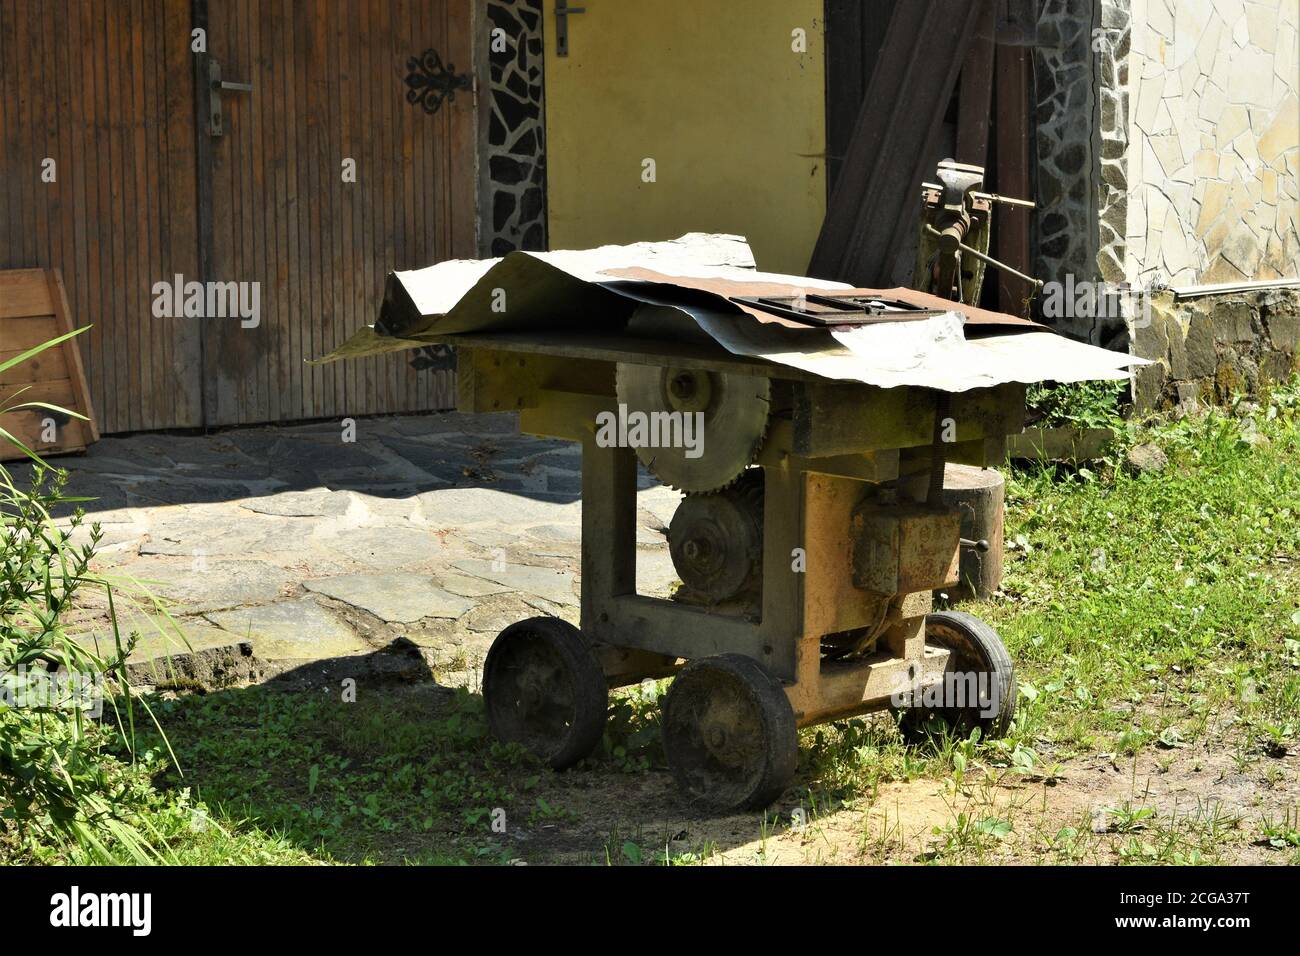 Old circular table saw machine or circular saw bench on four wheels covered with peaces of metal sheets standing on the grass in front of gate. Stock Photo